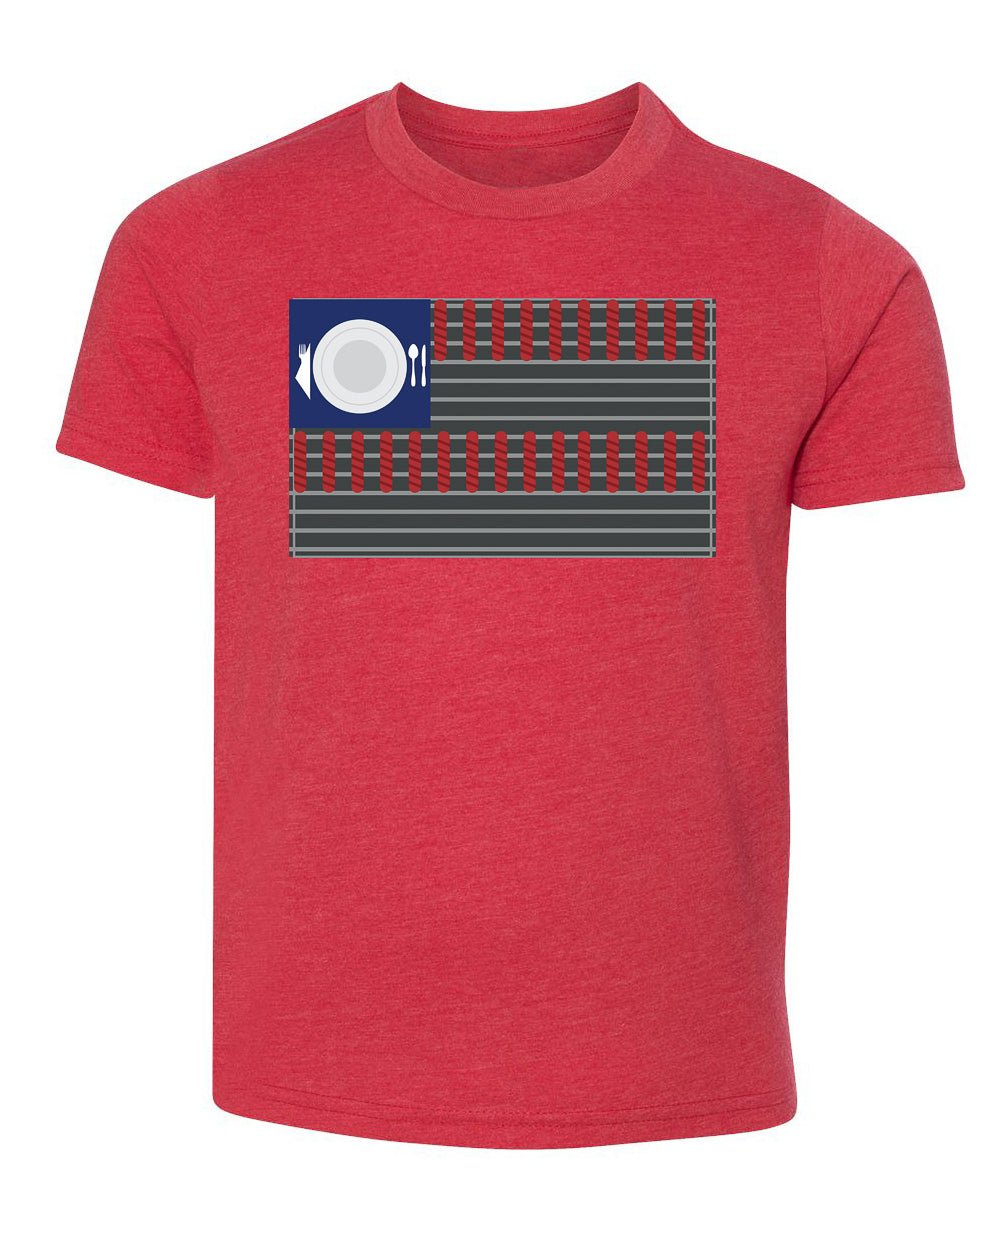 American Flag Grill Kids 4th of July T Shirt - Mato & Hash